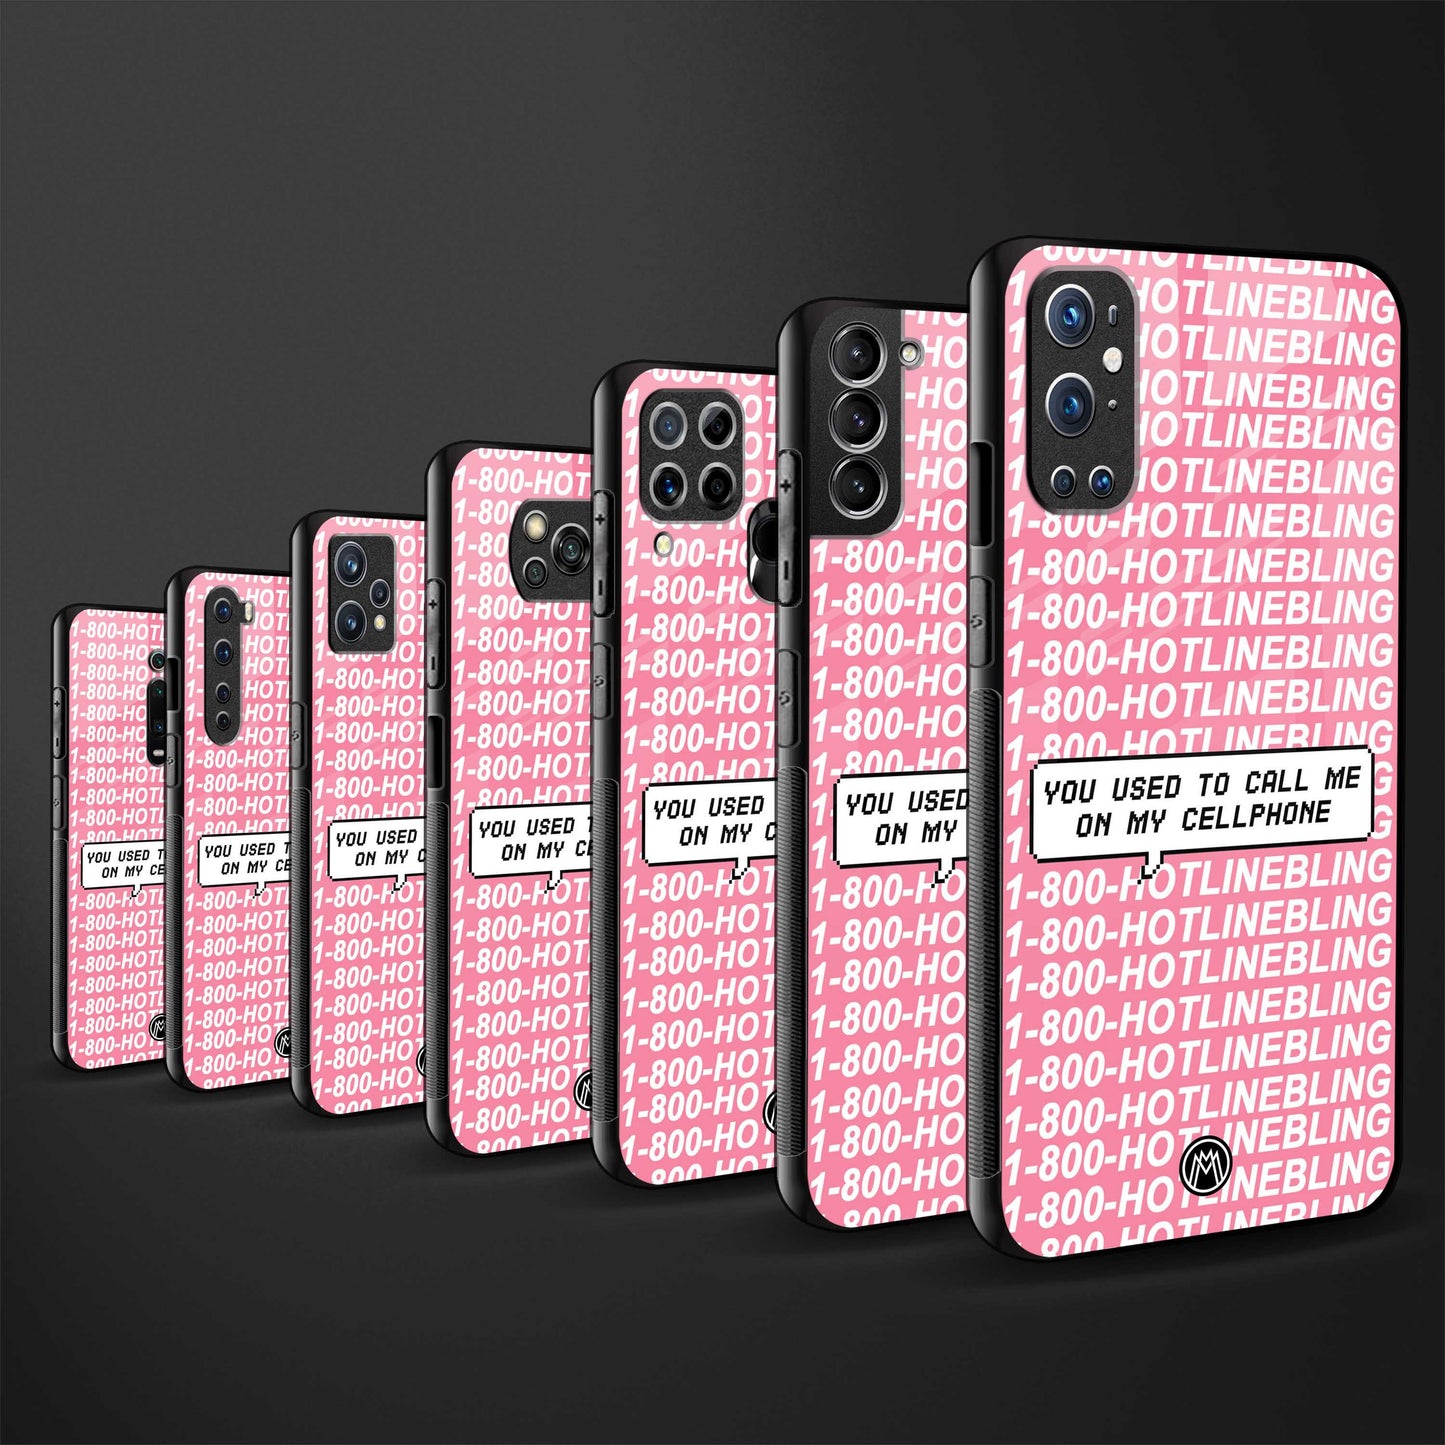 1800 hotline bling phone cover for samsung galaxy note 10 lite 